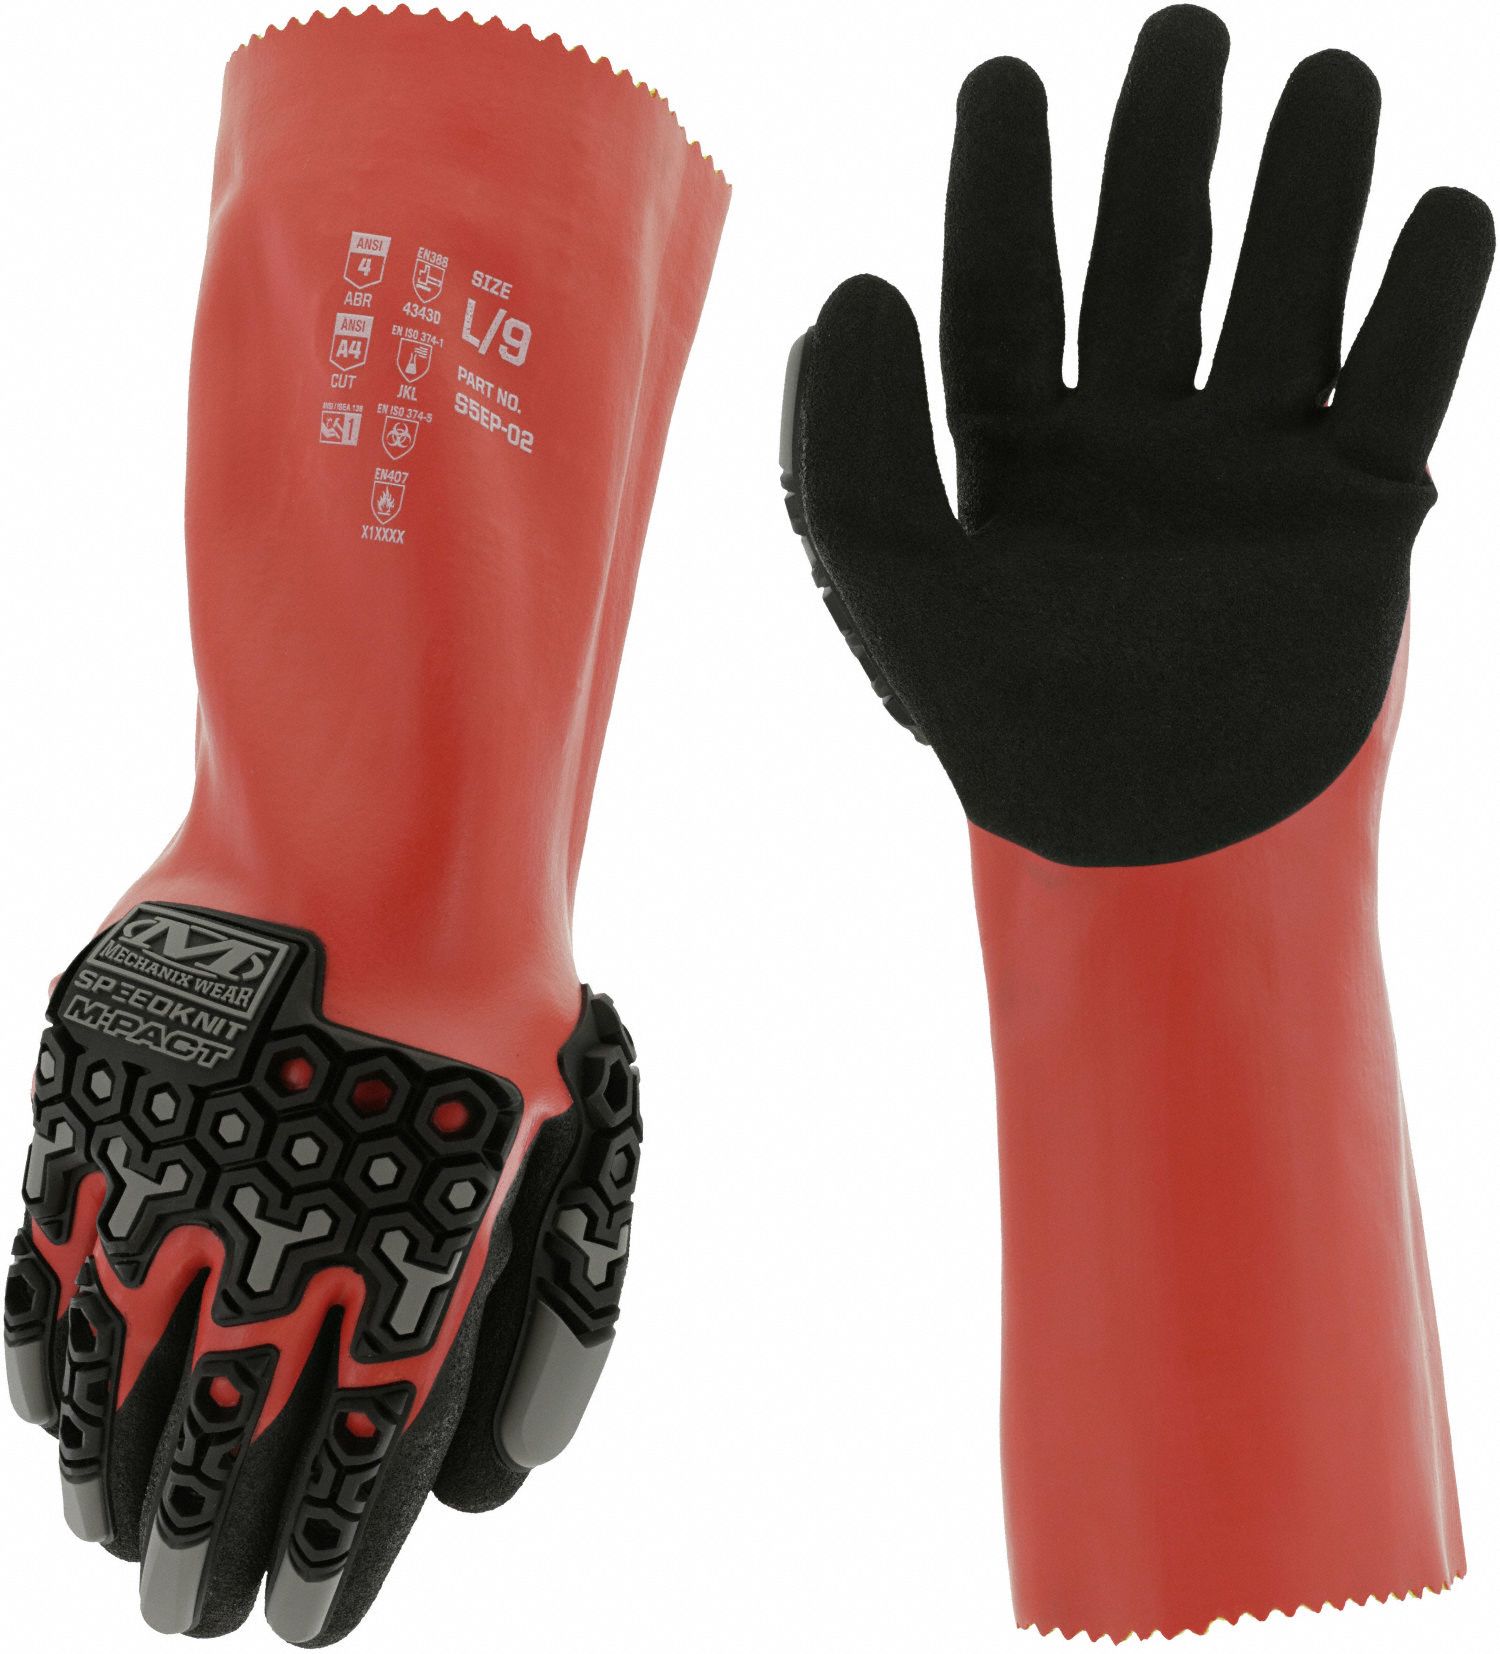 MECHANIX WEAR CHEMICAL GLOVES, S, RED, 14 IN LONG, 18 GA THICK